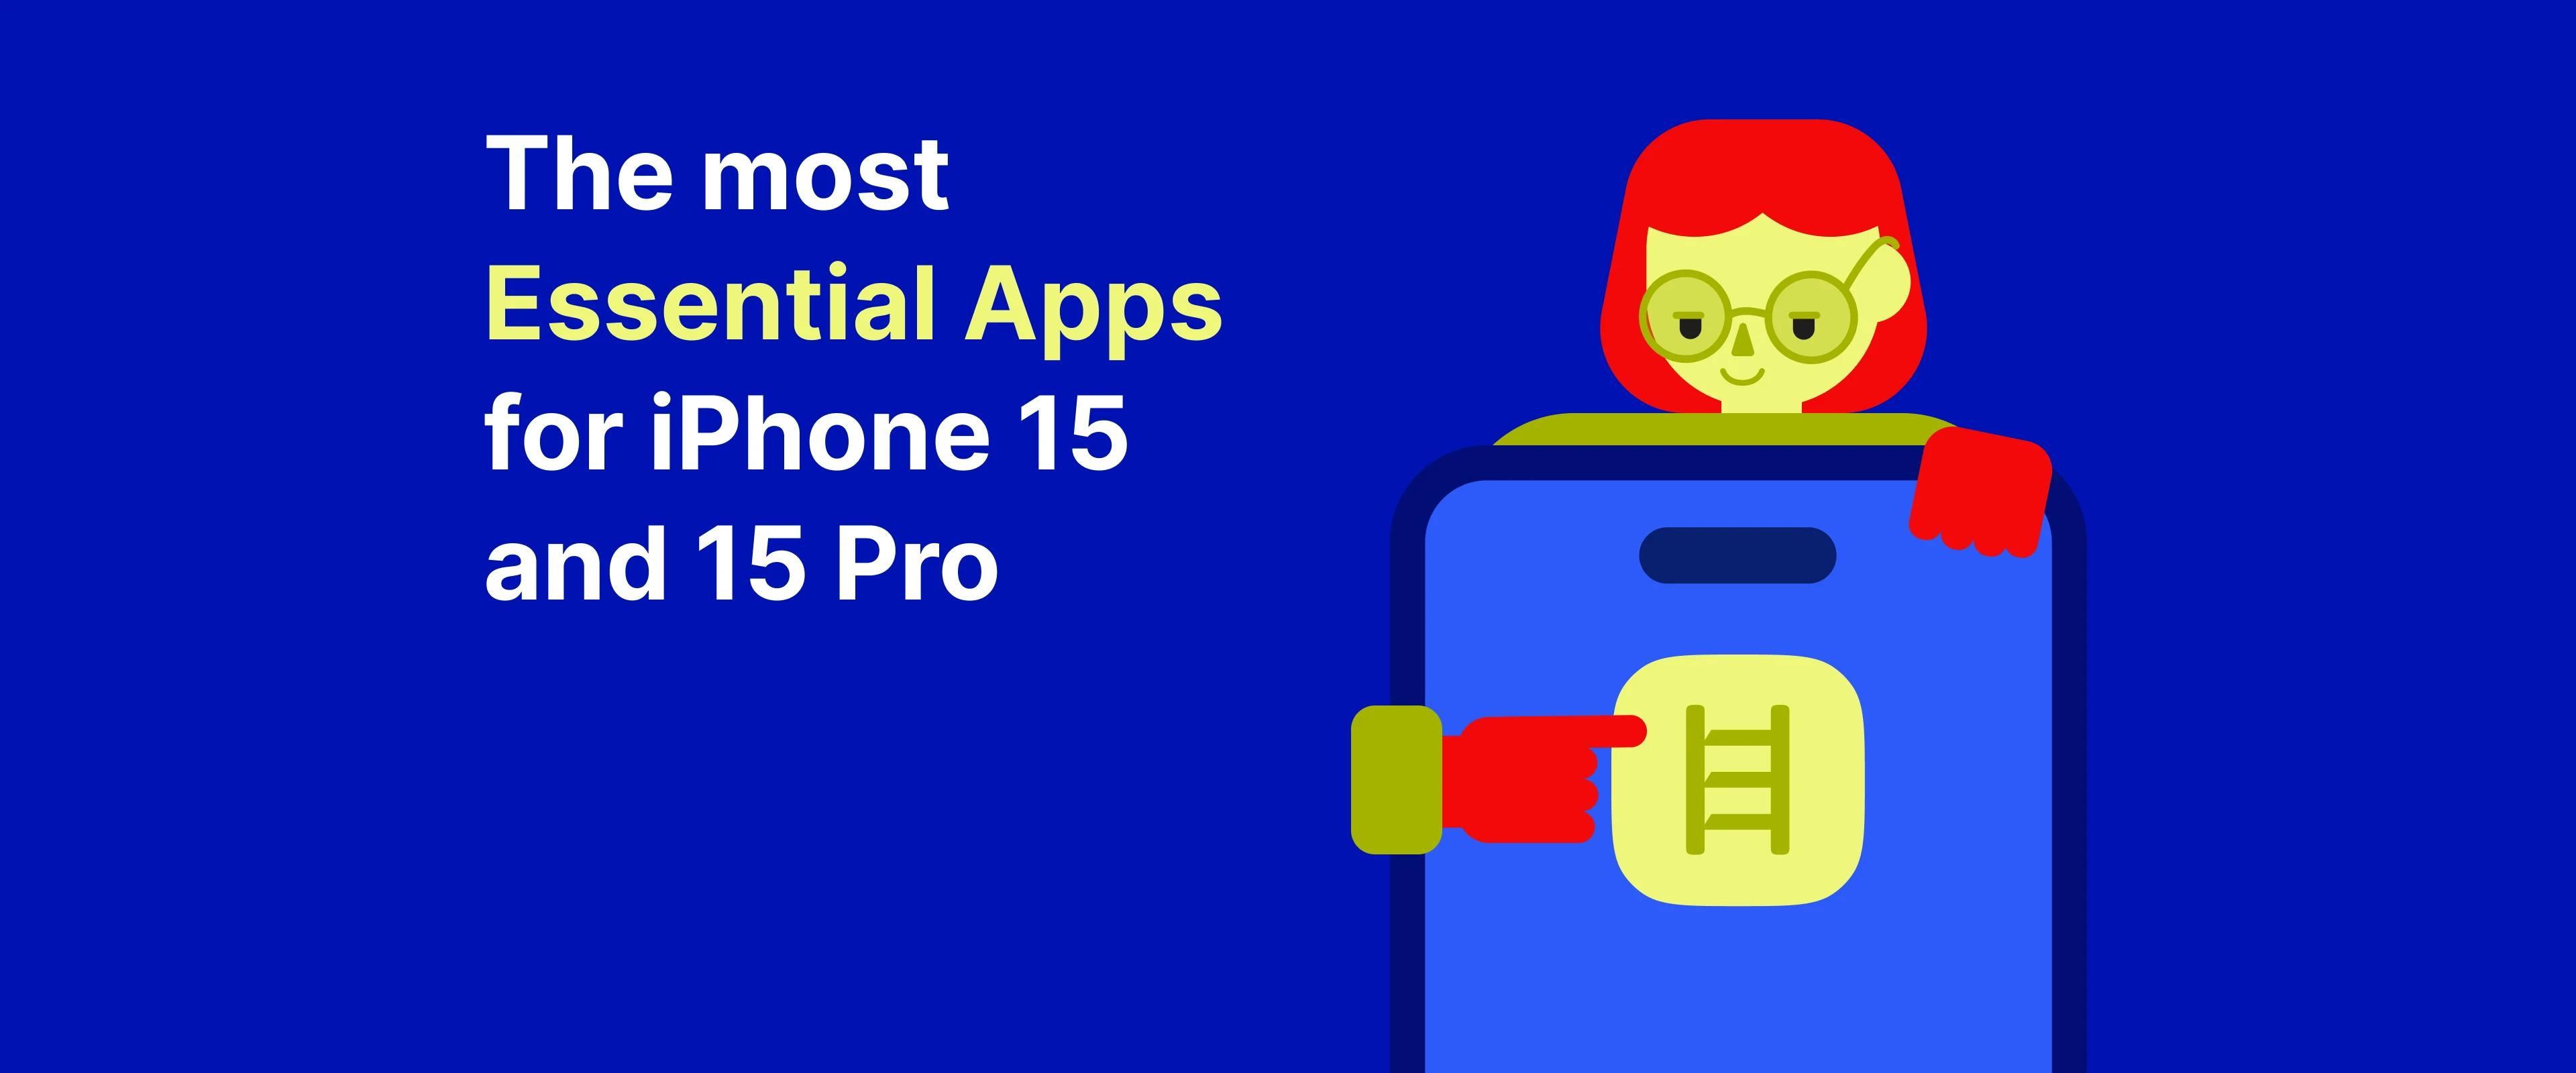 the_most_essential_apps_for_iphone_15_and_15_pro